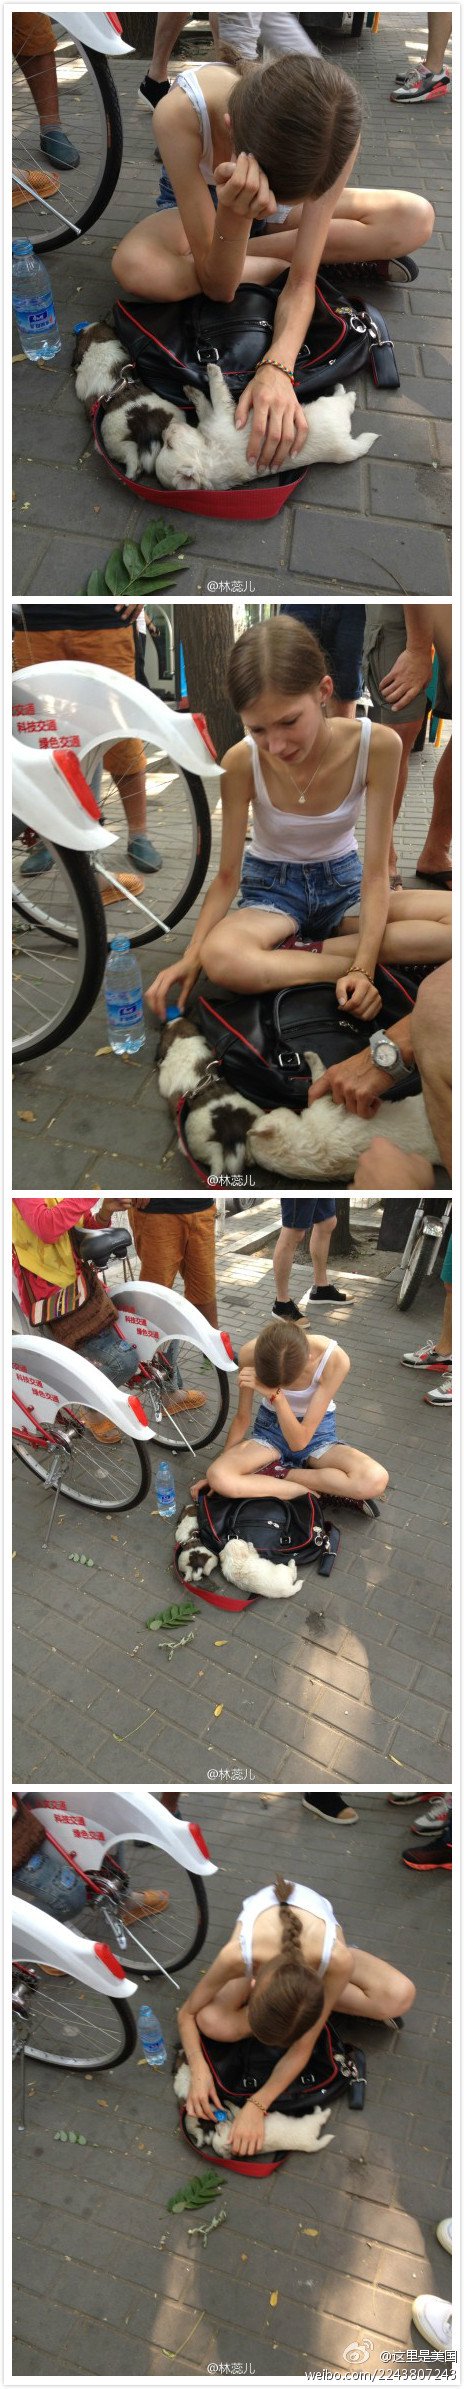 464x2389xA-Foreign-Girl-With-Tears-Gets-Two-Dogs-Free-in-Beijing.jpg.pagespeed.ic.84xhzyXfWm.jpg